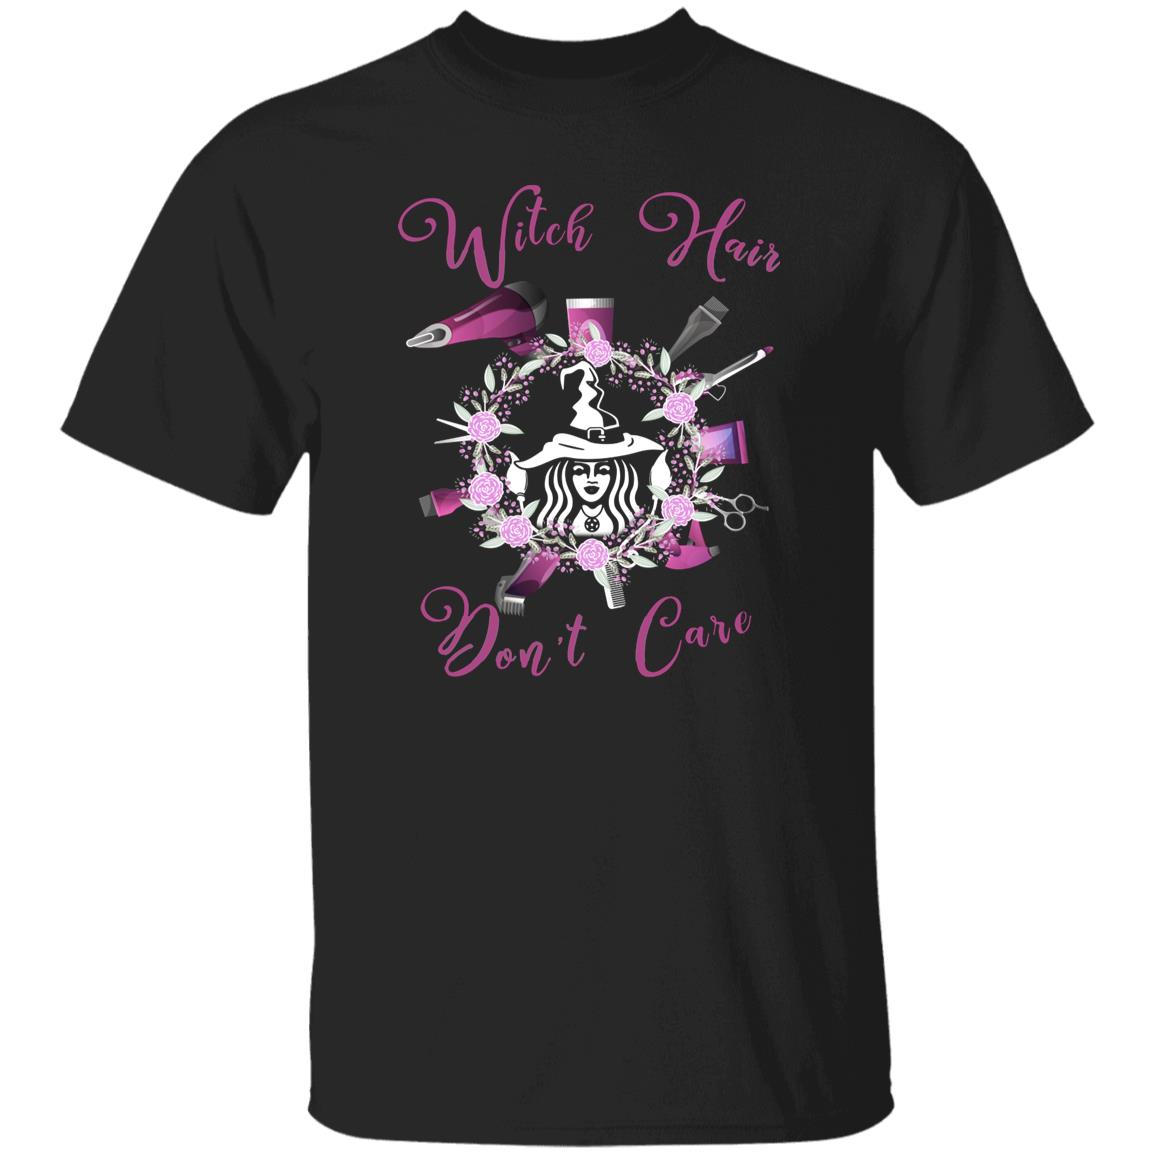 Witch hair don't care Unisex T-shirt hairdresser haircutter tee black dark heather-Family-Gift-Planet